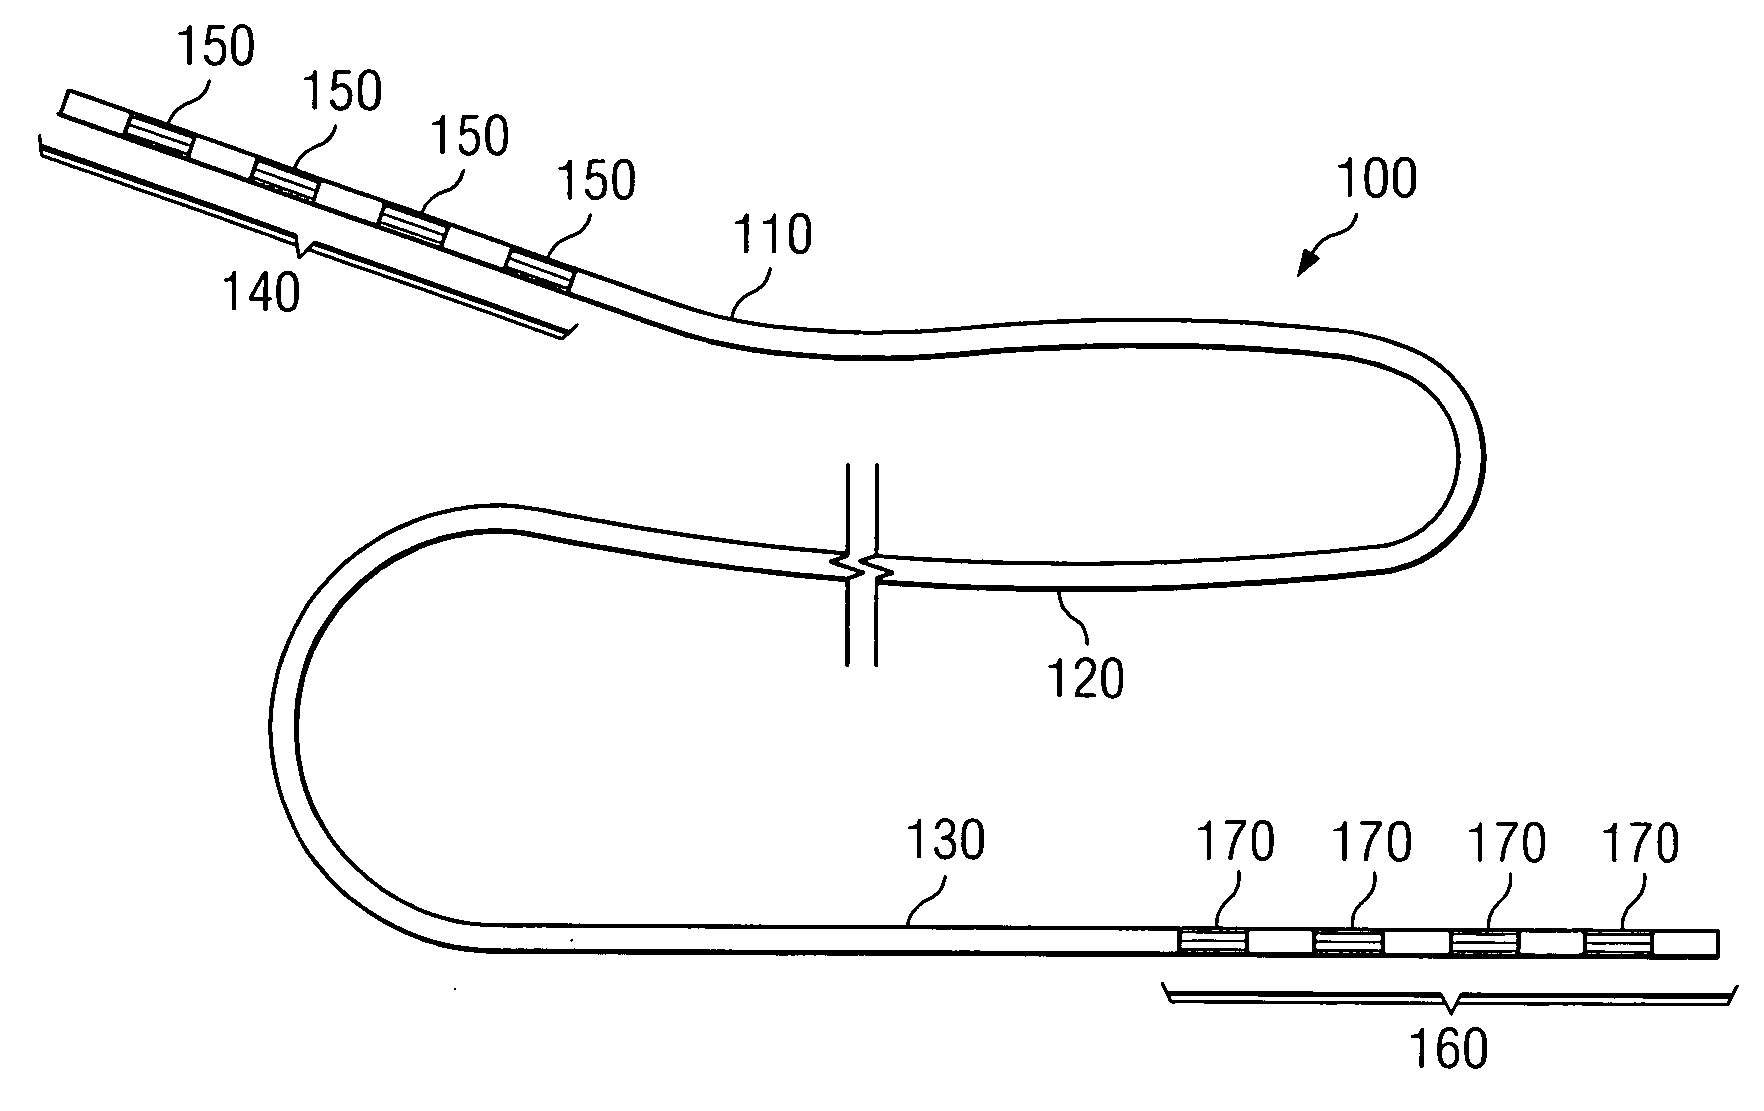 System and method for providing a medical lead body having conductors that are wound in opposite directions